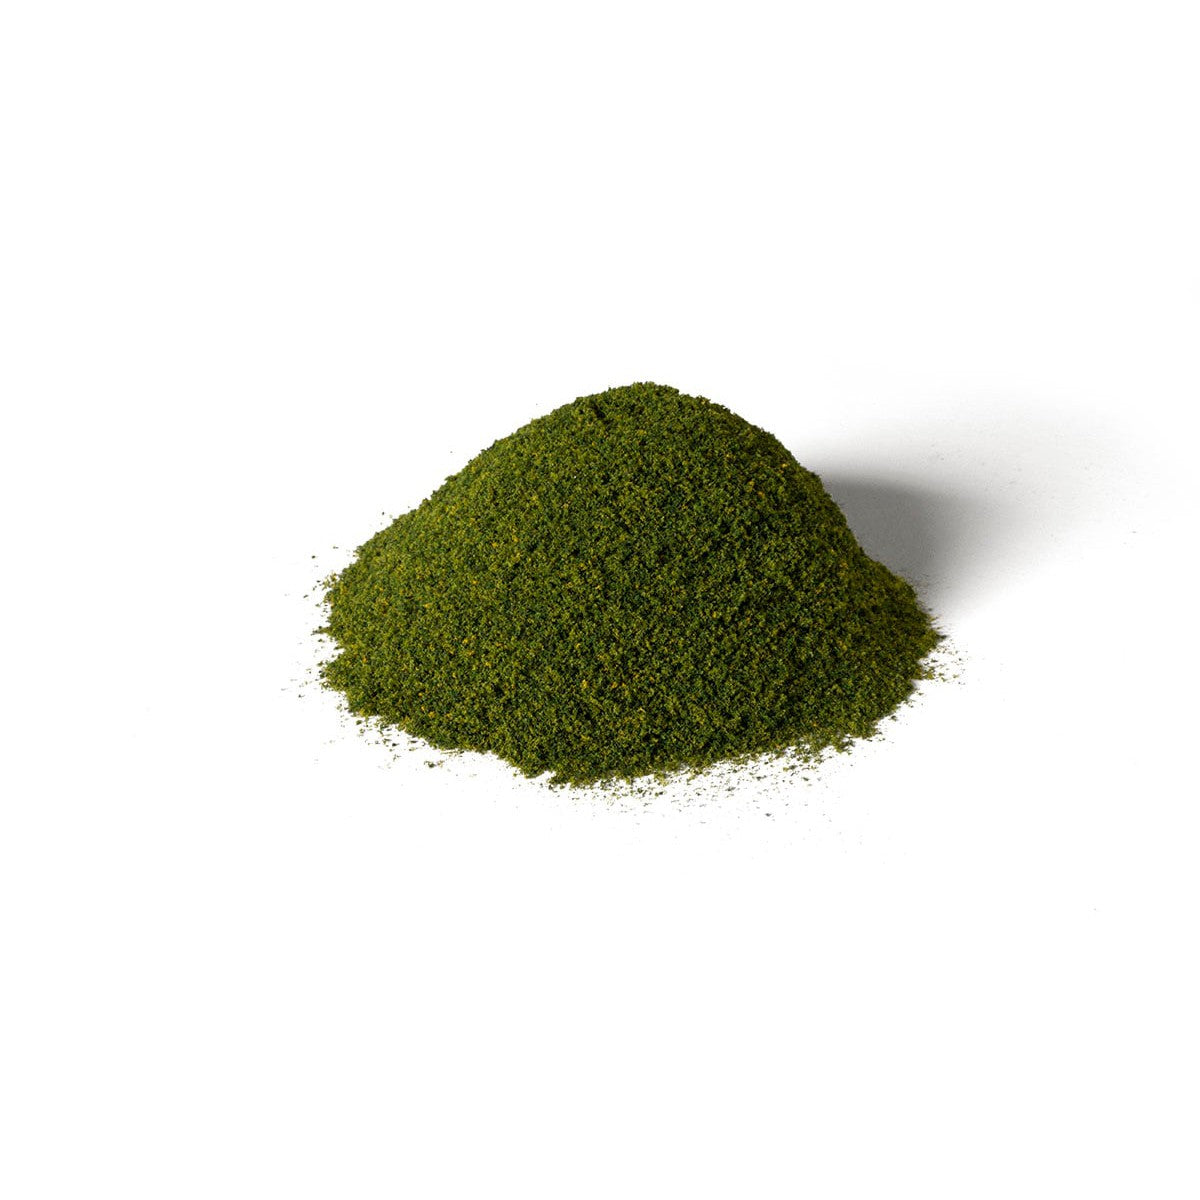 Green Base Layer - Green Base Layer is pre-blended with diverse shades of green